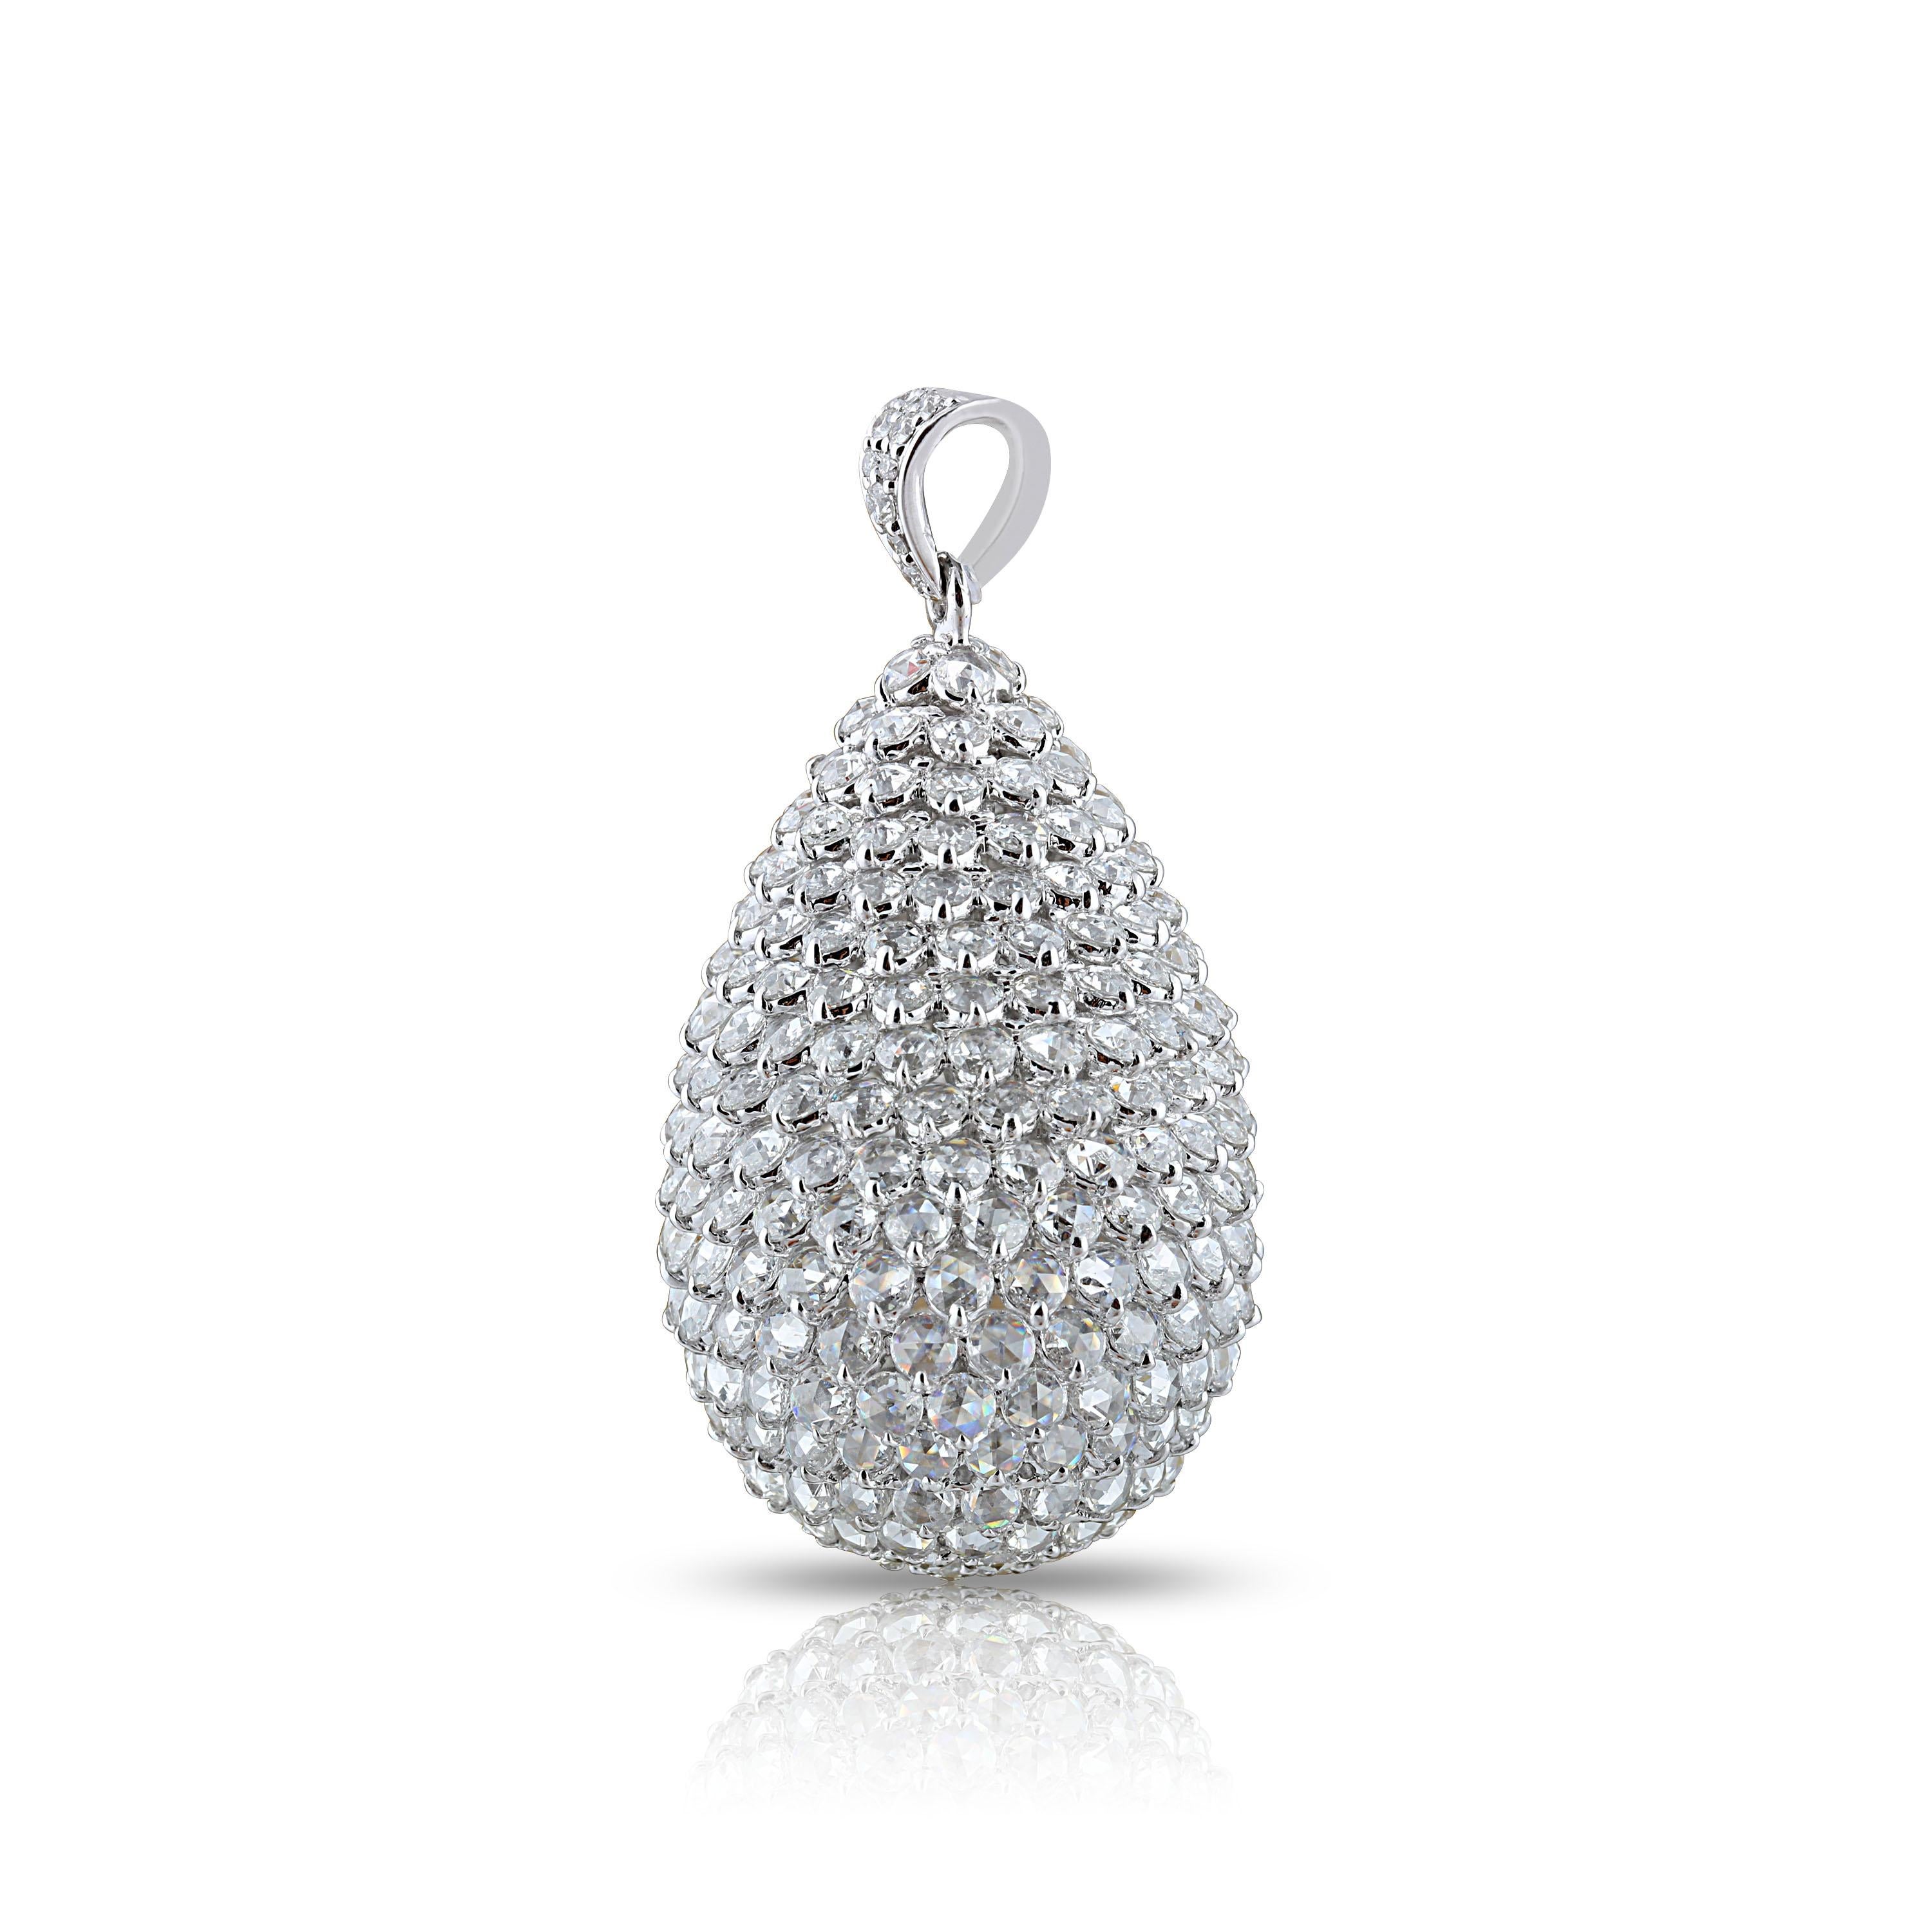 18K white gold and diamond pineapple pendant

Indulge yourself with this opulent piece of jewellery — an 18K white gold oval shaped pendant featuring round rose cut and round brilliant cut diamonds in a prong setting. The 327 stones gives this